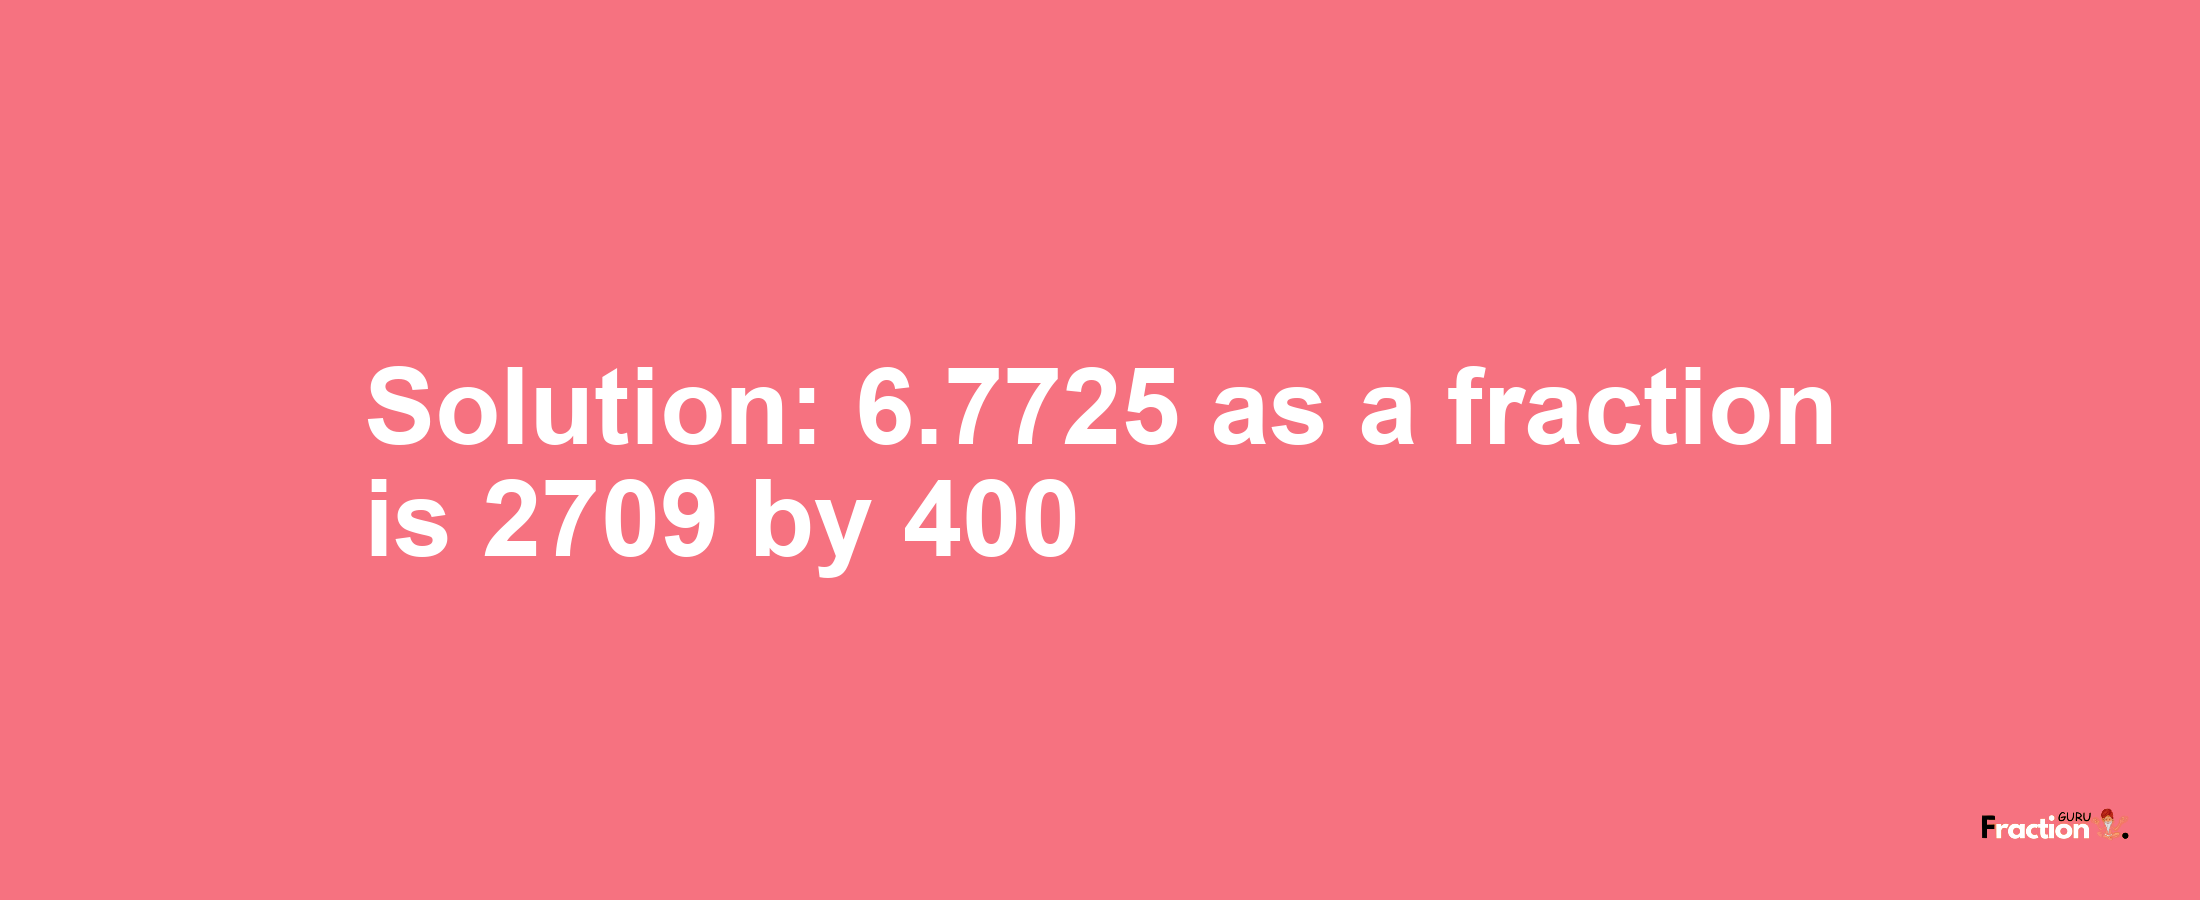 Solution:6.7725 as a fraction is 2709/400